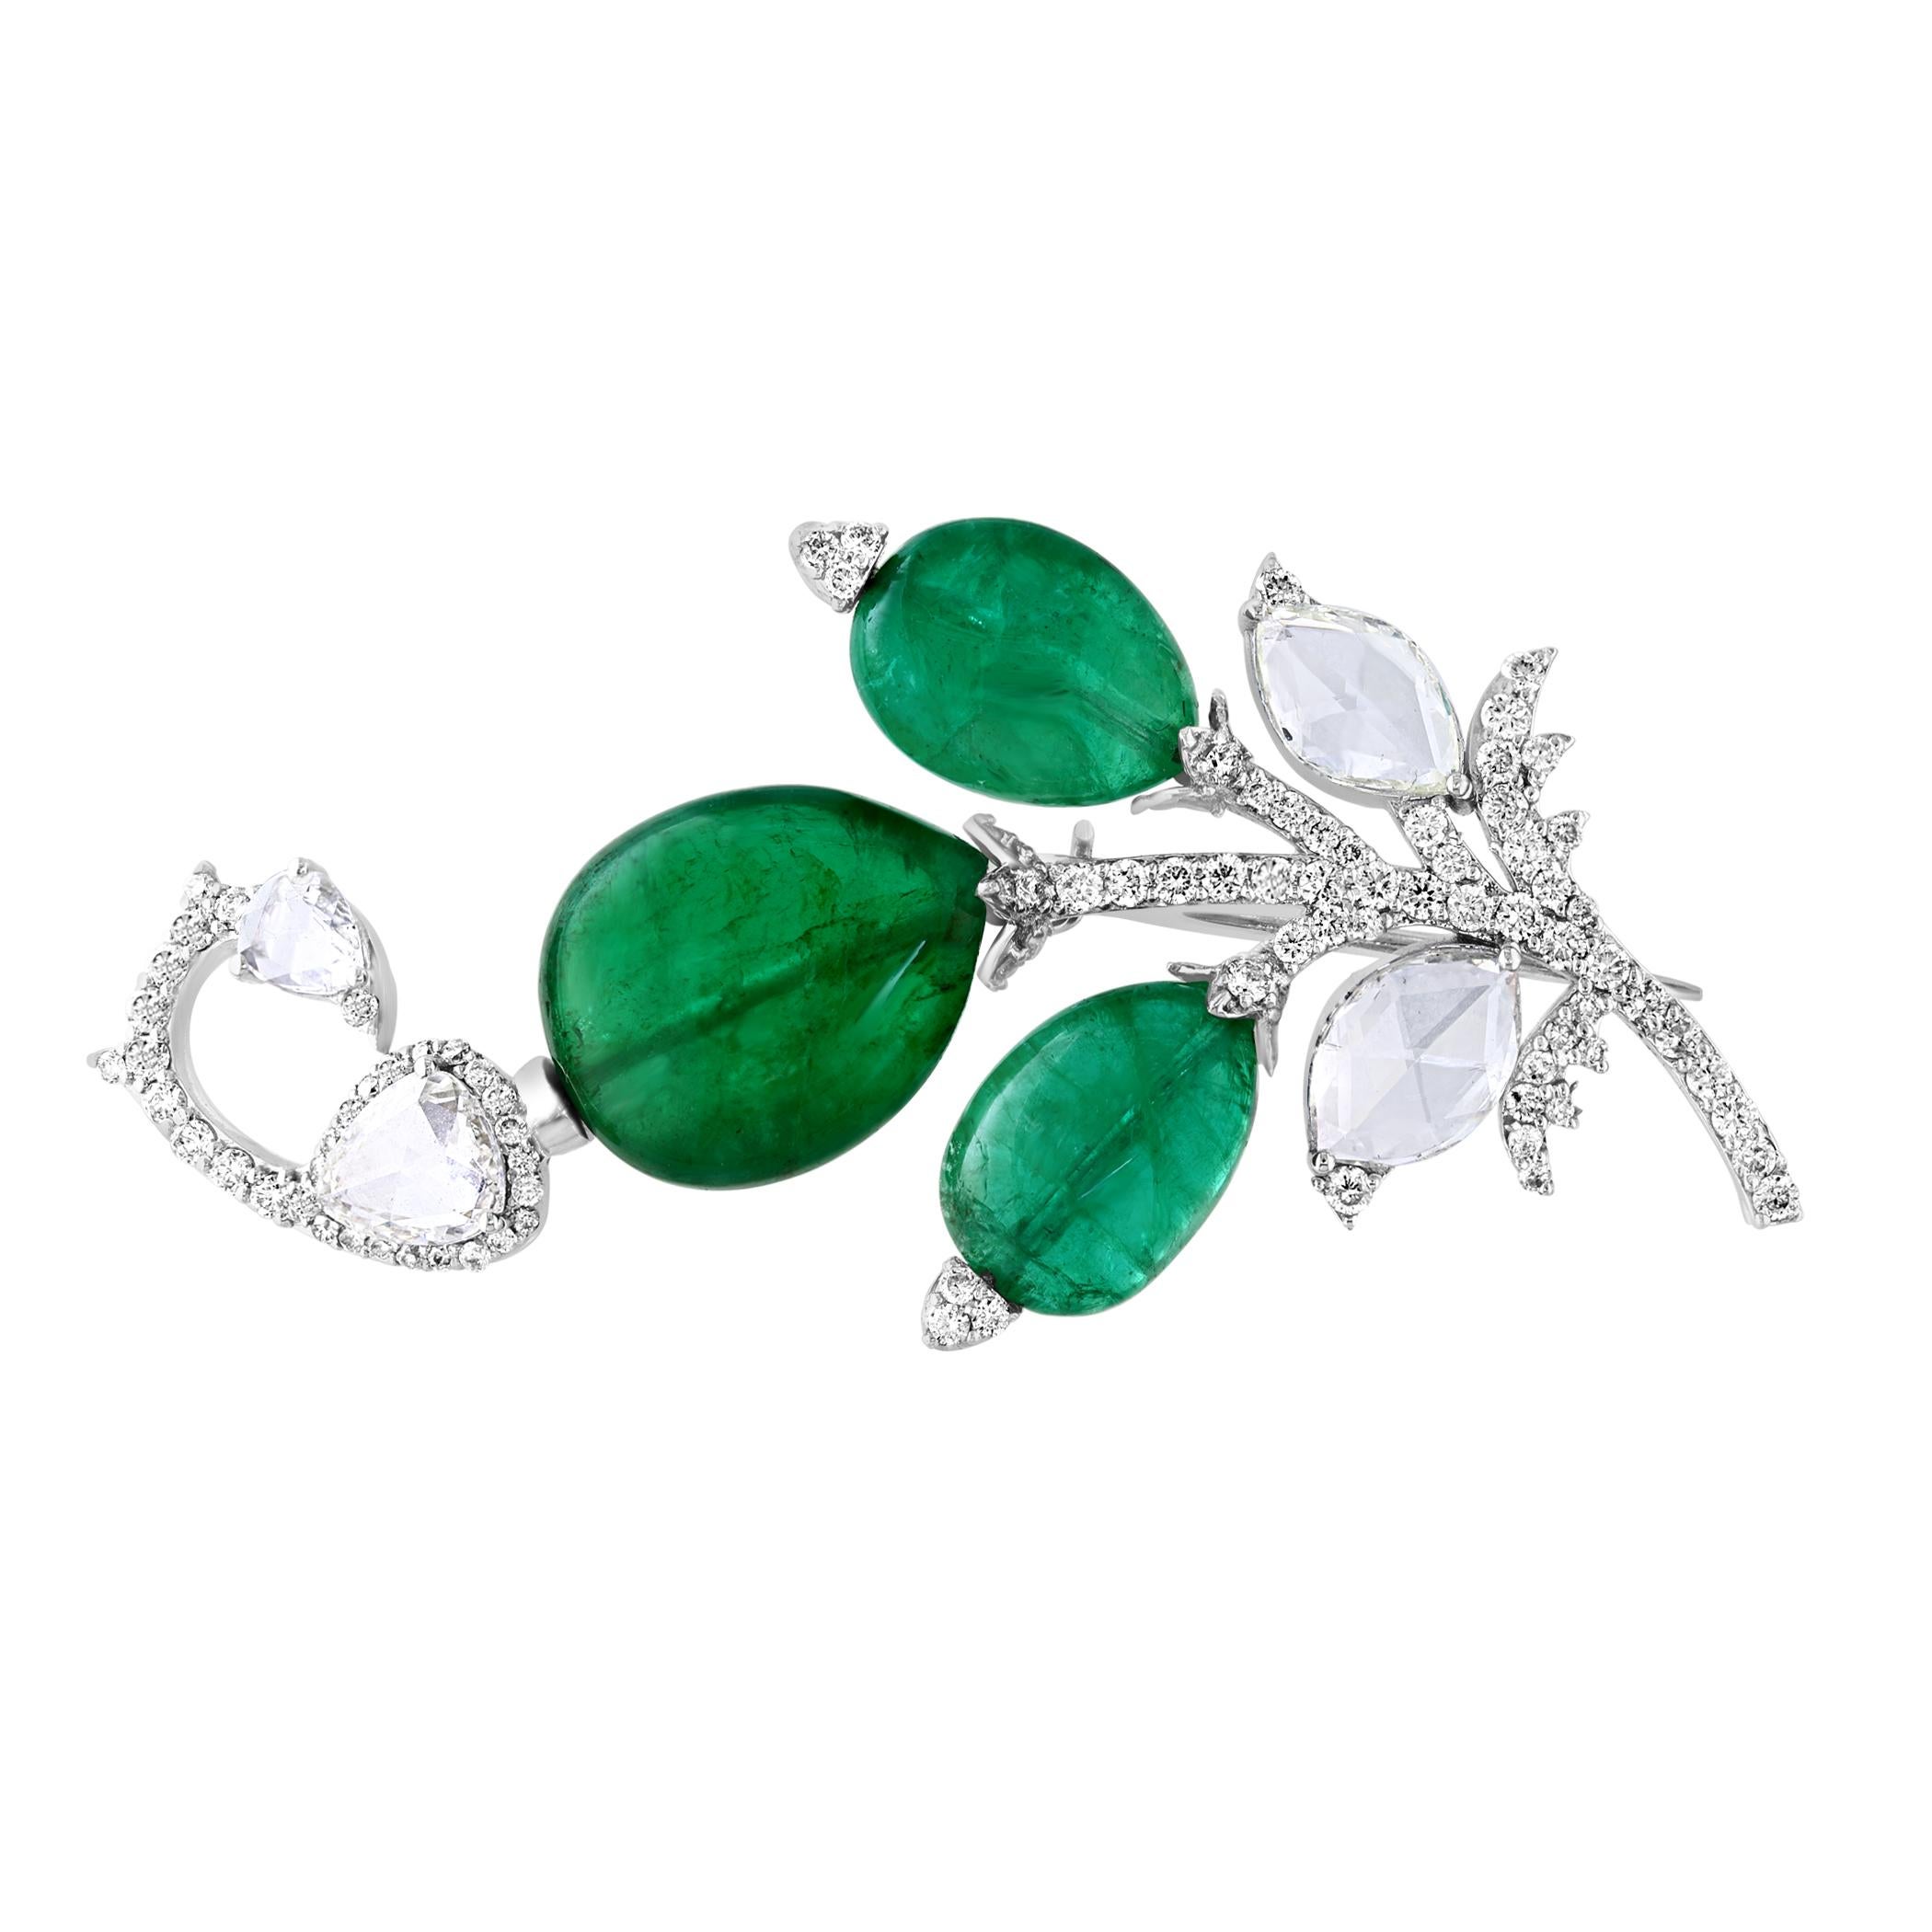 8.5 Ct Natural Oval Emerald Bead & 4 Ct Rose cut Diamond Brooch /Pin 18 Kt Gold For Sale 12